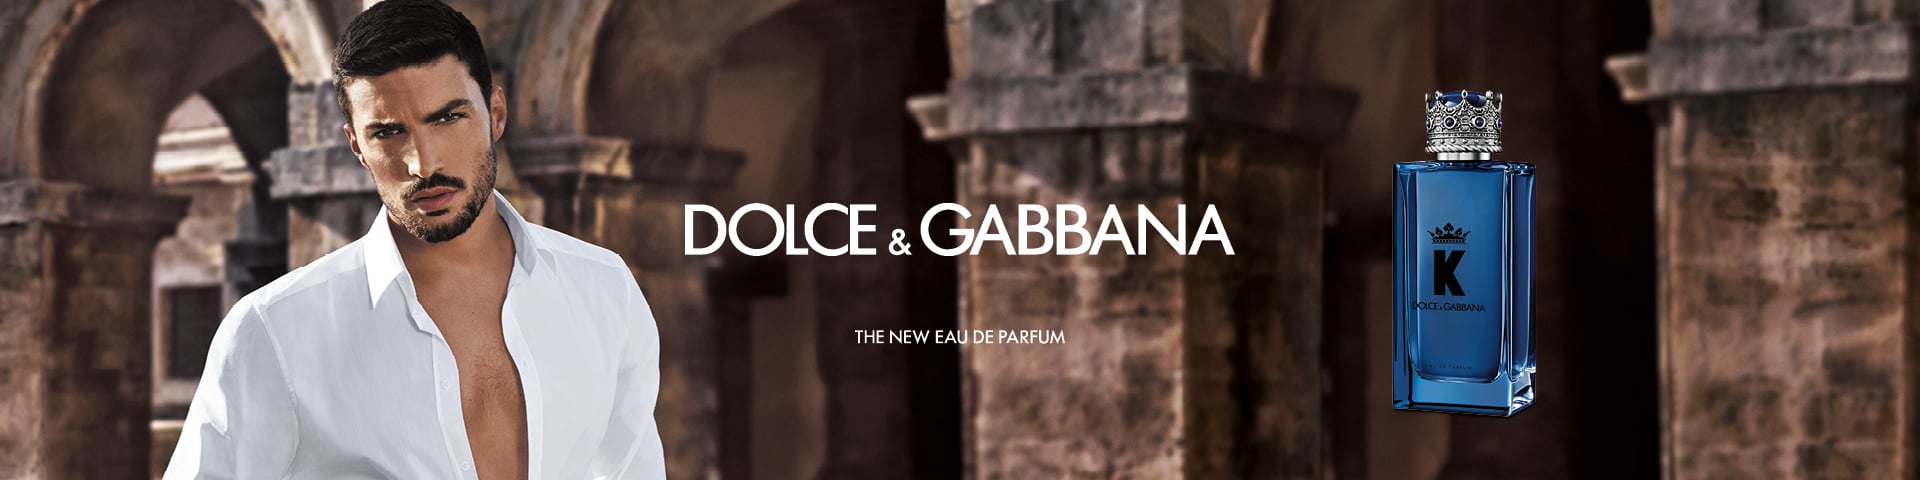 Dolce Gabbana Shop South Africa | Shop Online in SA Online at EDGARS